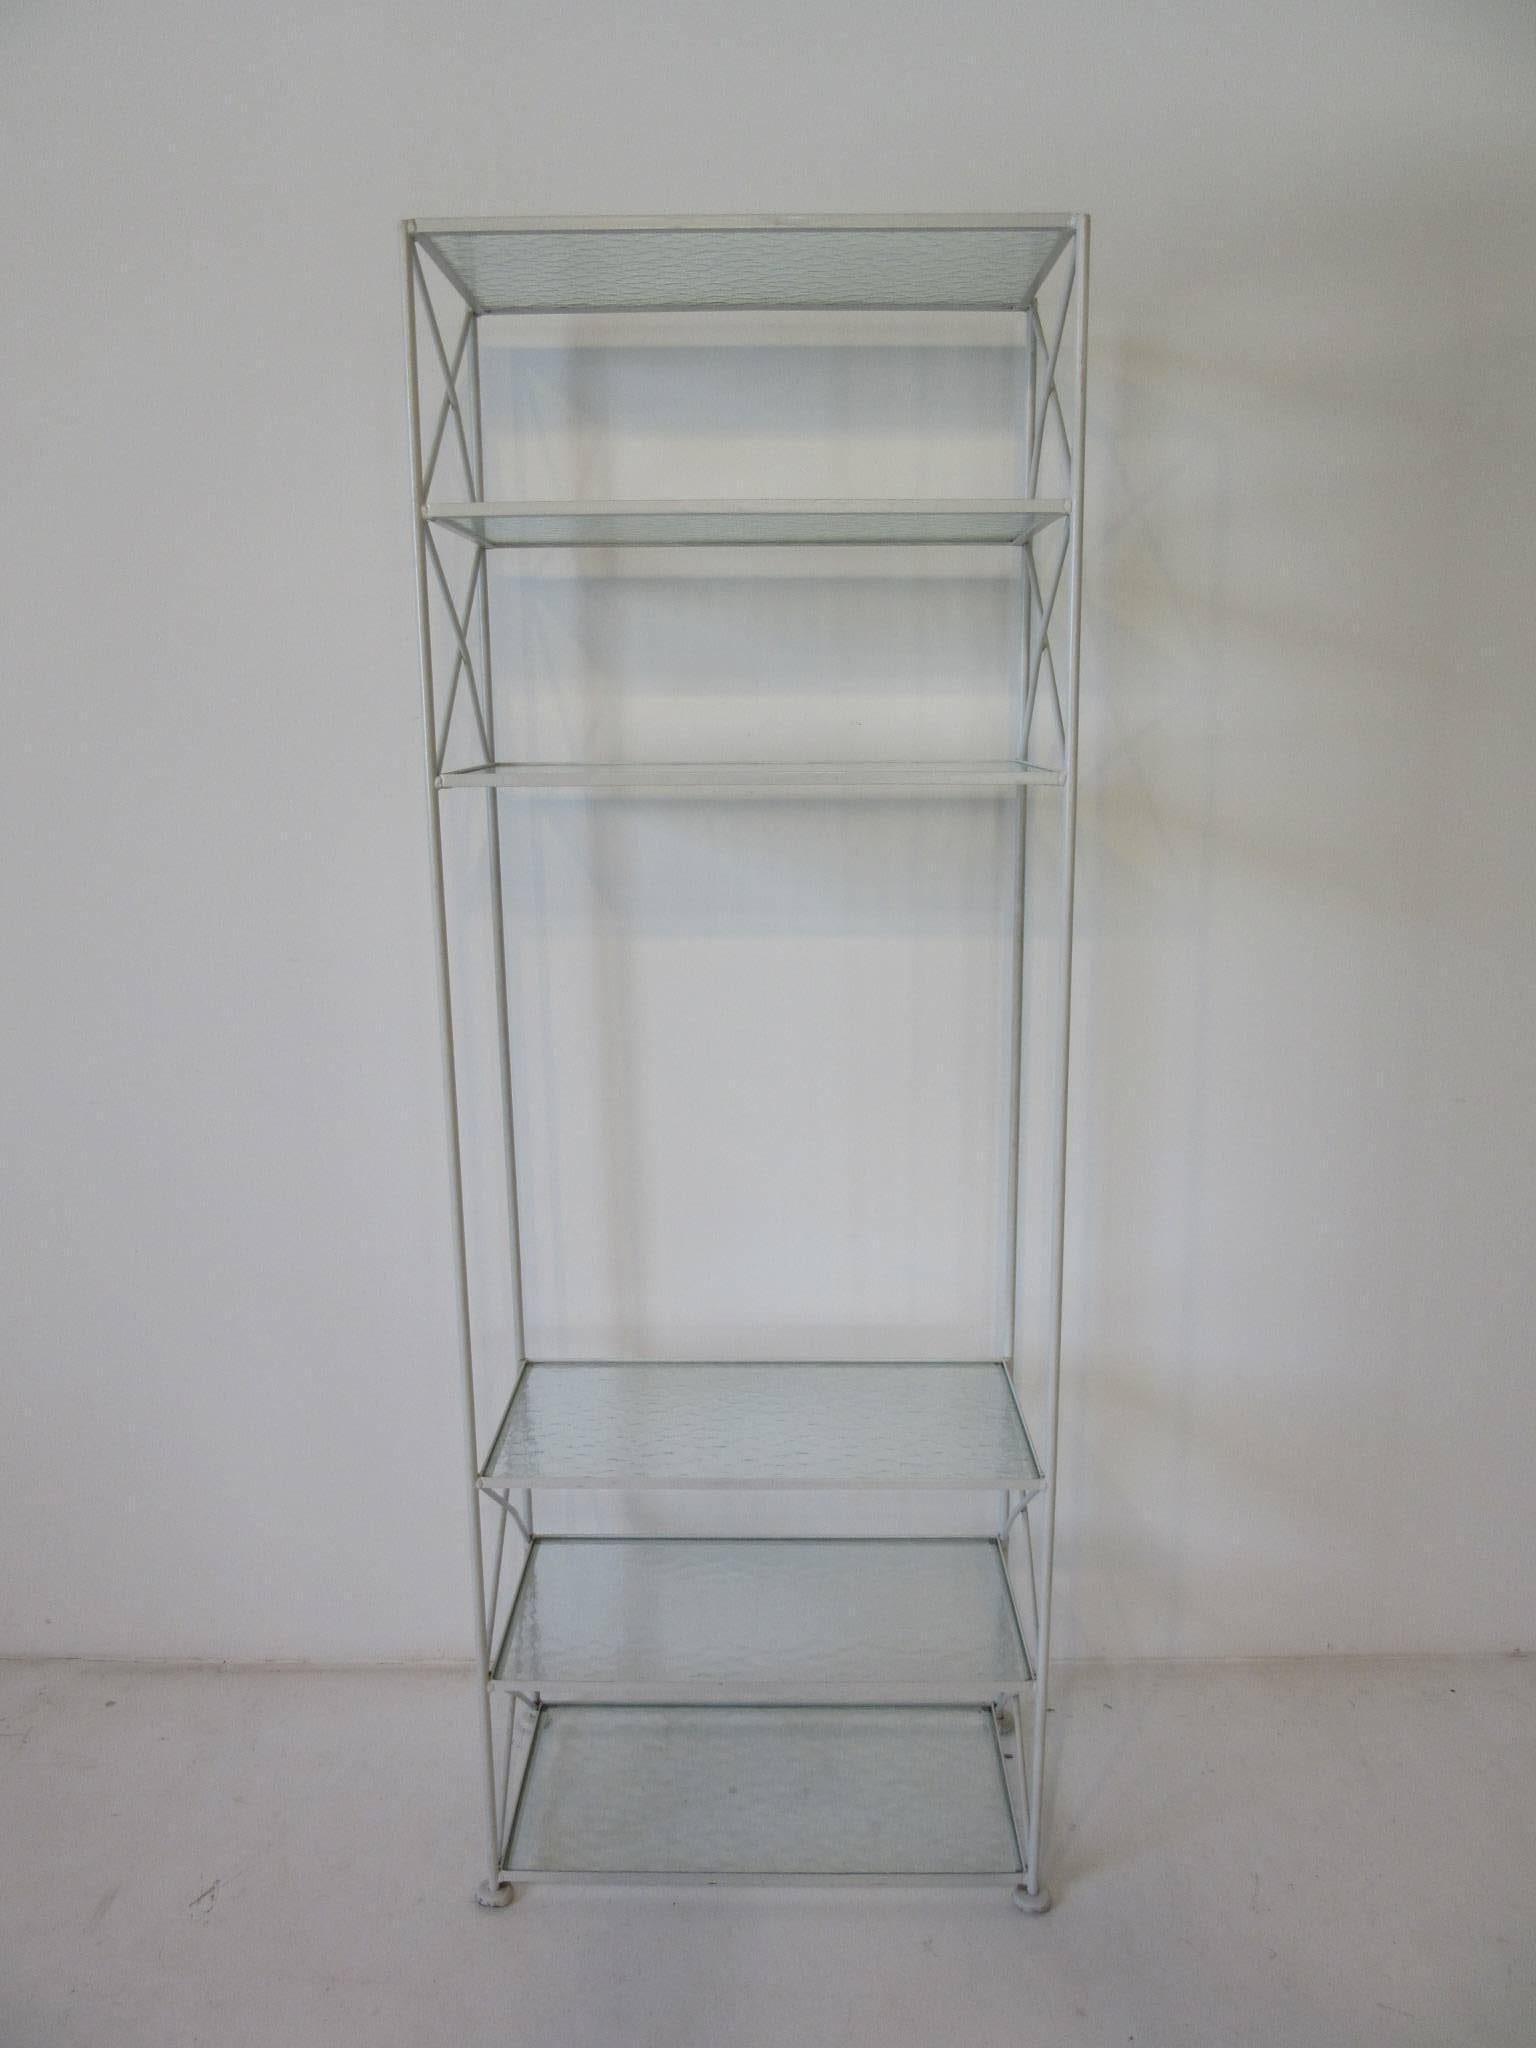 A hard to find satin white iron etagere or bookcase with pebbled glass shelves and X cross bracing a perfect companion to any Woodard furniture and great for finishing off your three seasons room or interior . Can be used outdoors depending on the